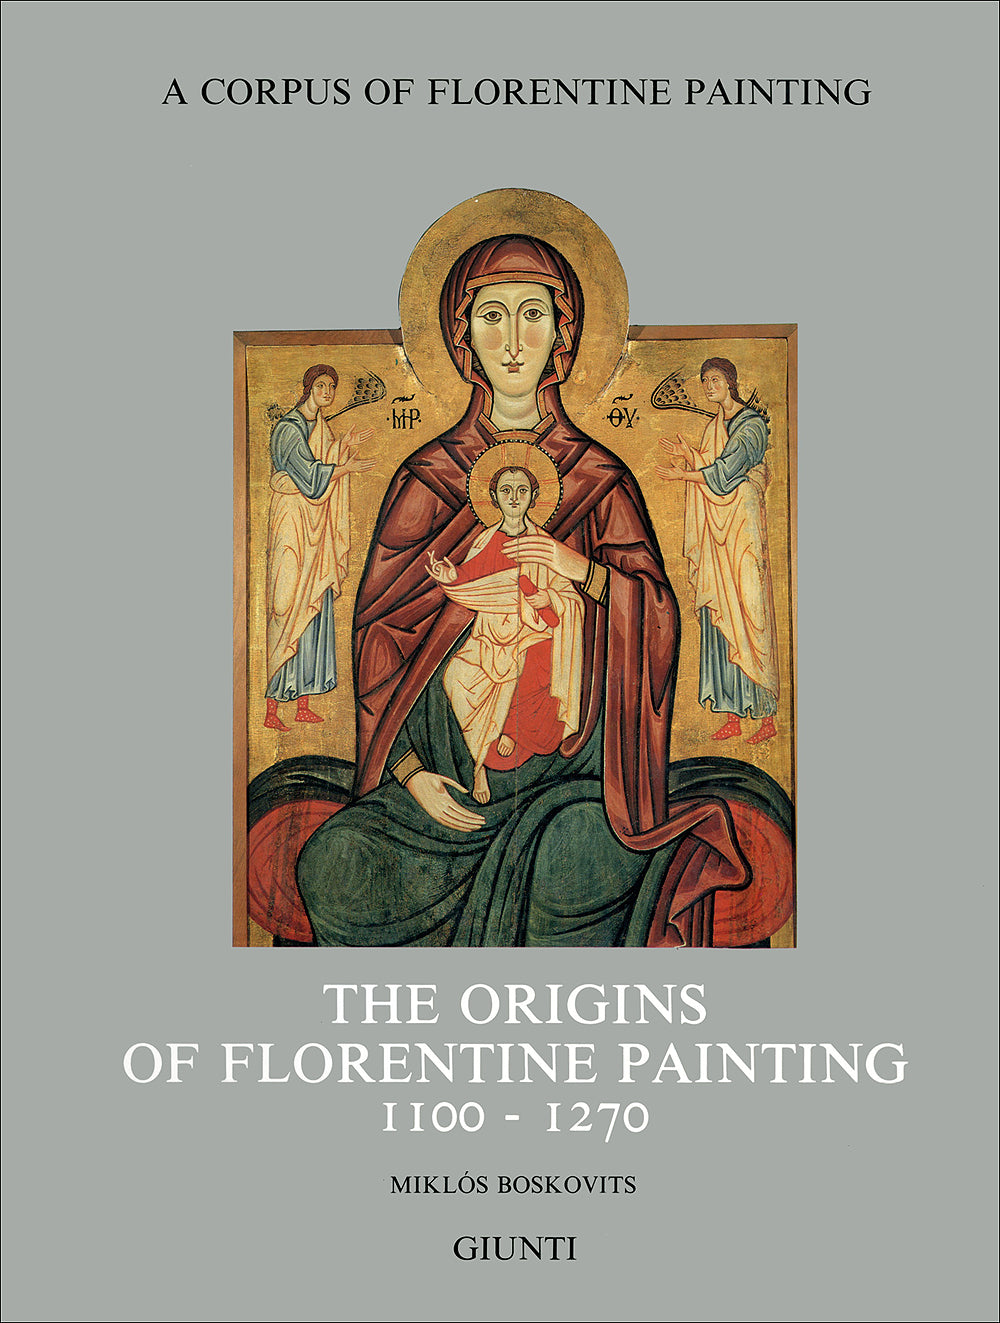 The origins of florentine painting (1100-1270) (in inglese). Section I, Volume I